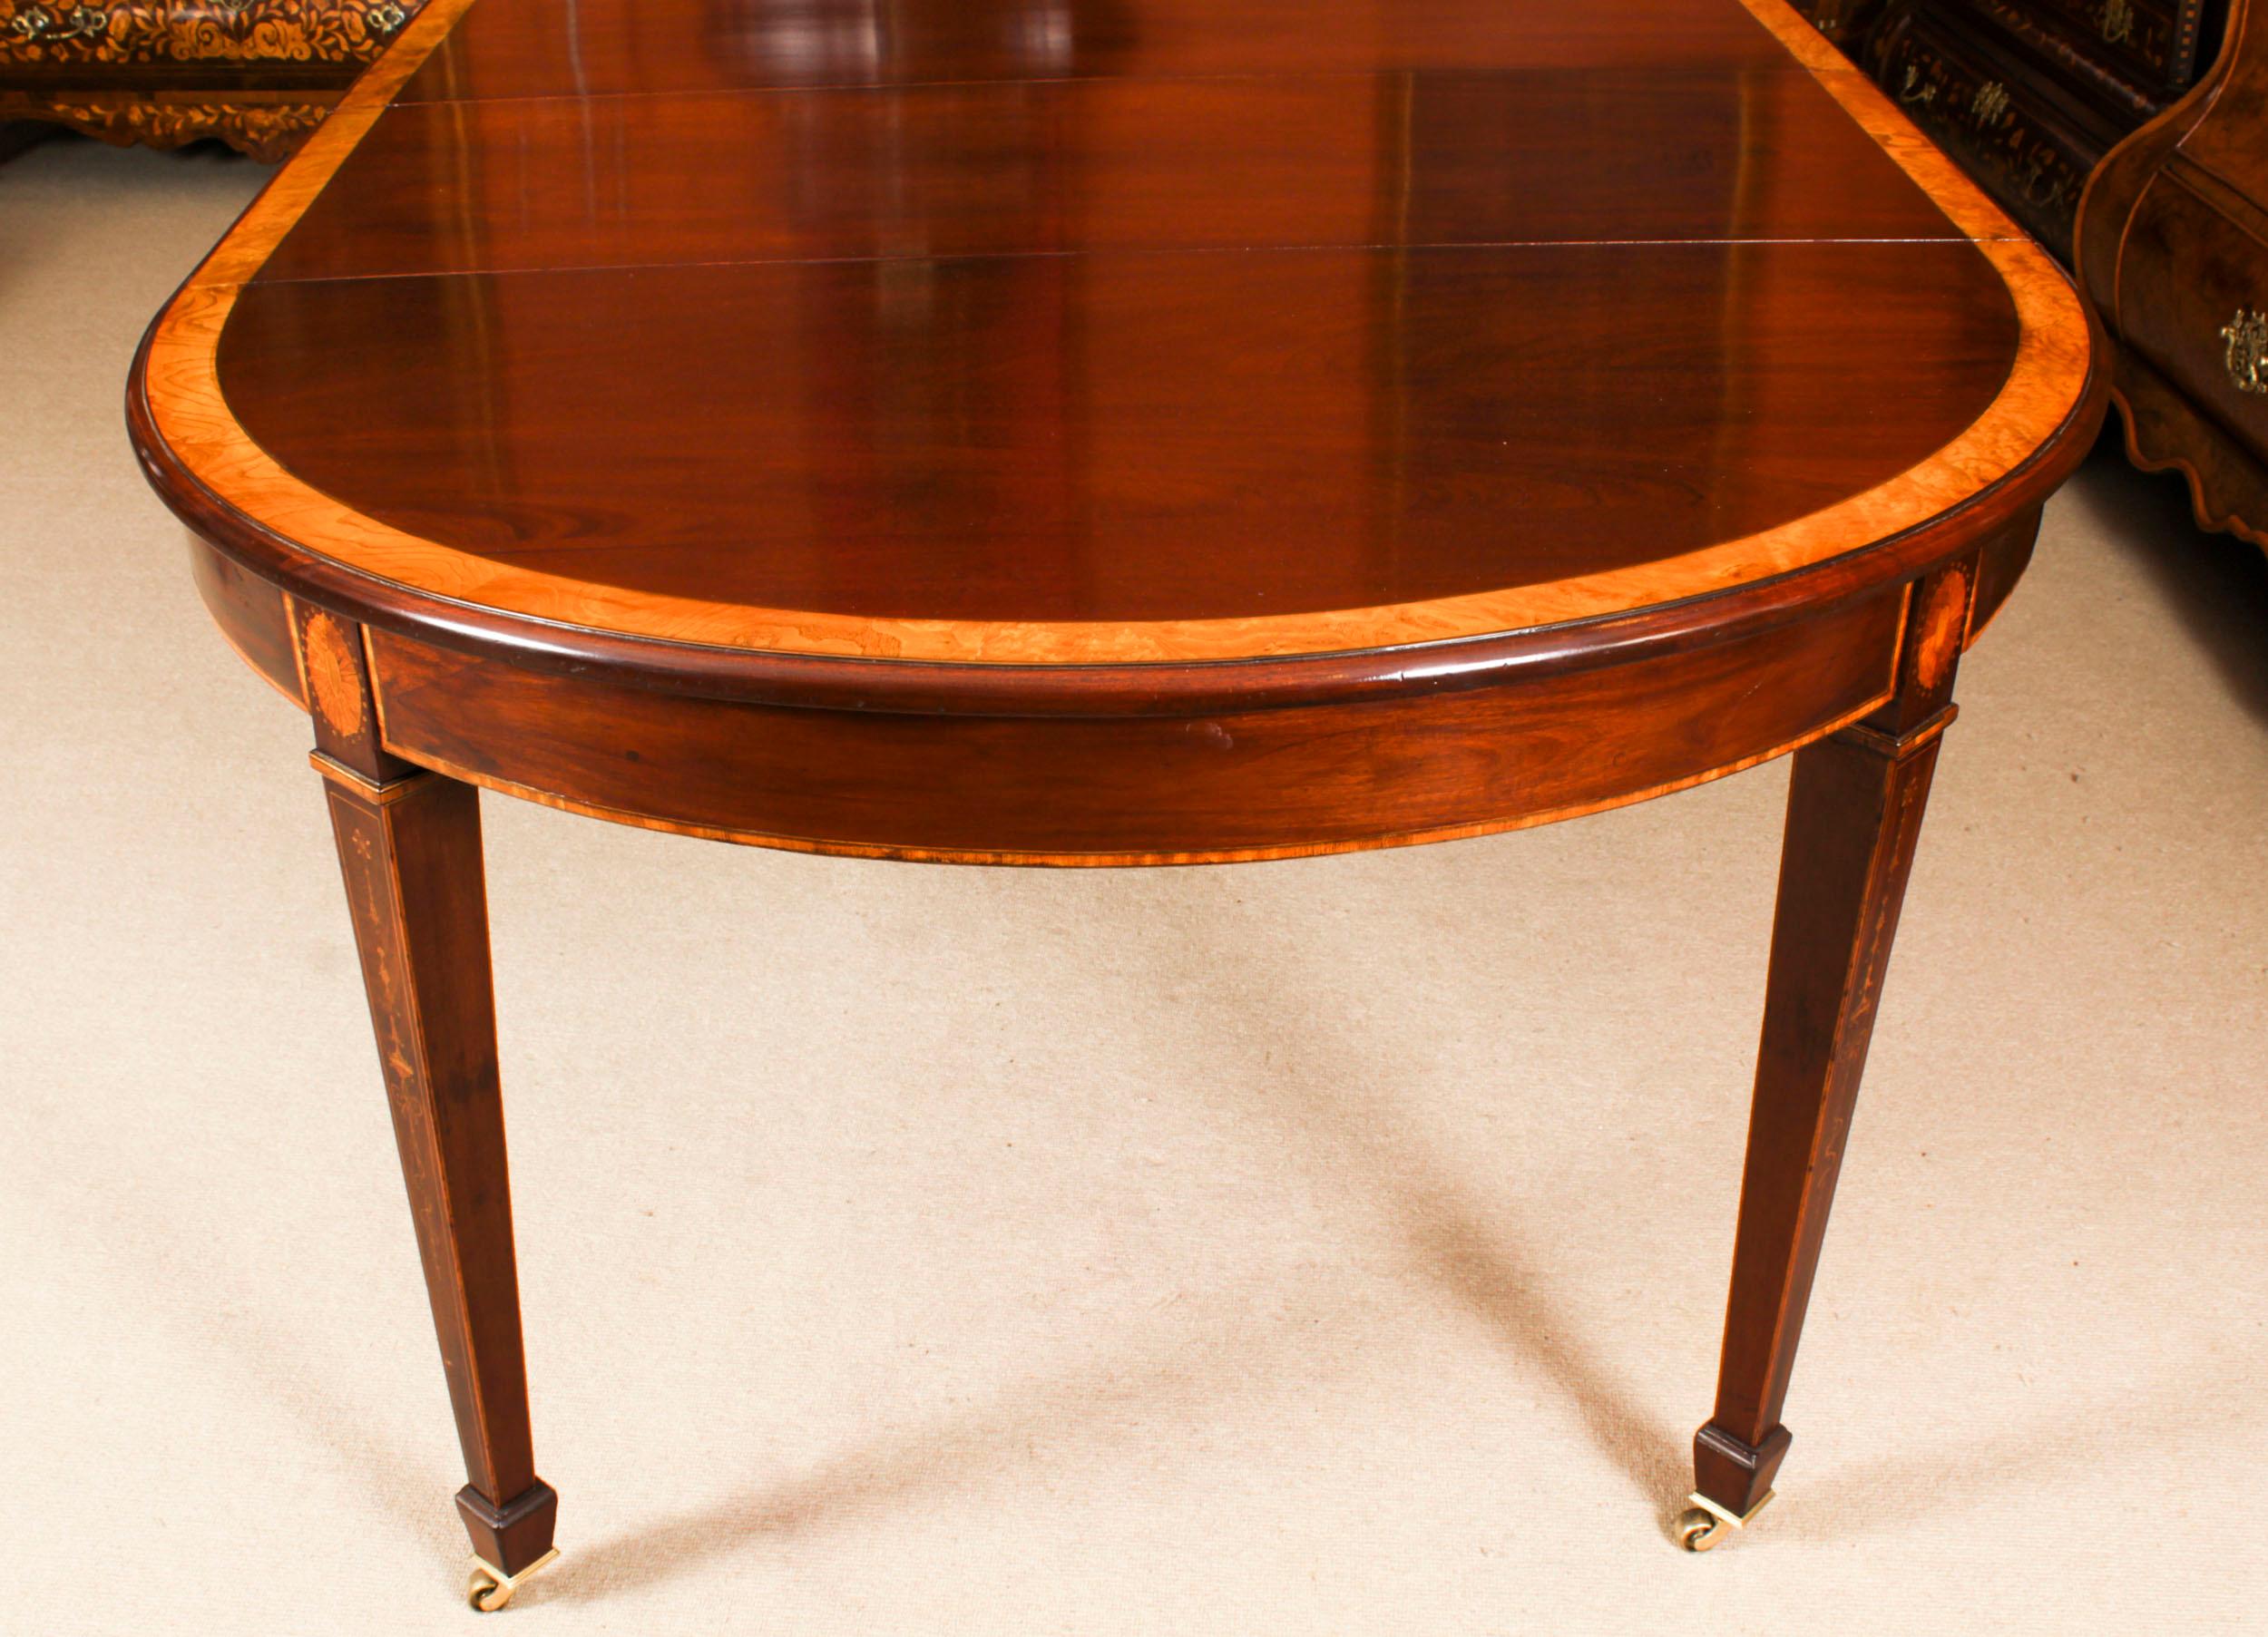 Antique Edwardian Inlaid Flame Mahogany Extending Dining Table Early 20th C. 8